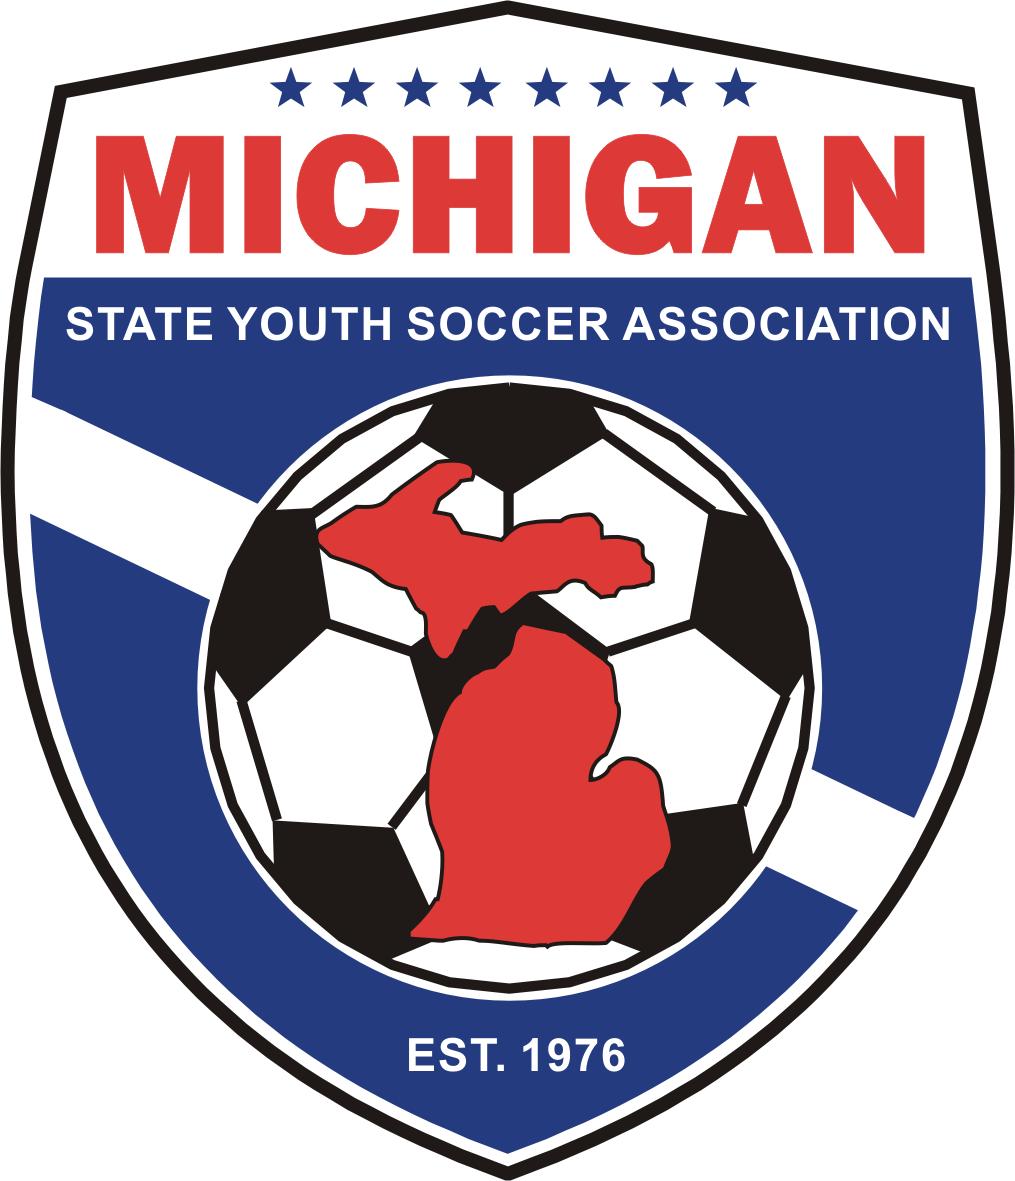 MICHIGAN STATE YOUTH SOCCER ASSOCIATION 2019 JUNIOR STATE CUP COMPETITION RULES 1. Competition Dates a. All preliminary games must be